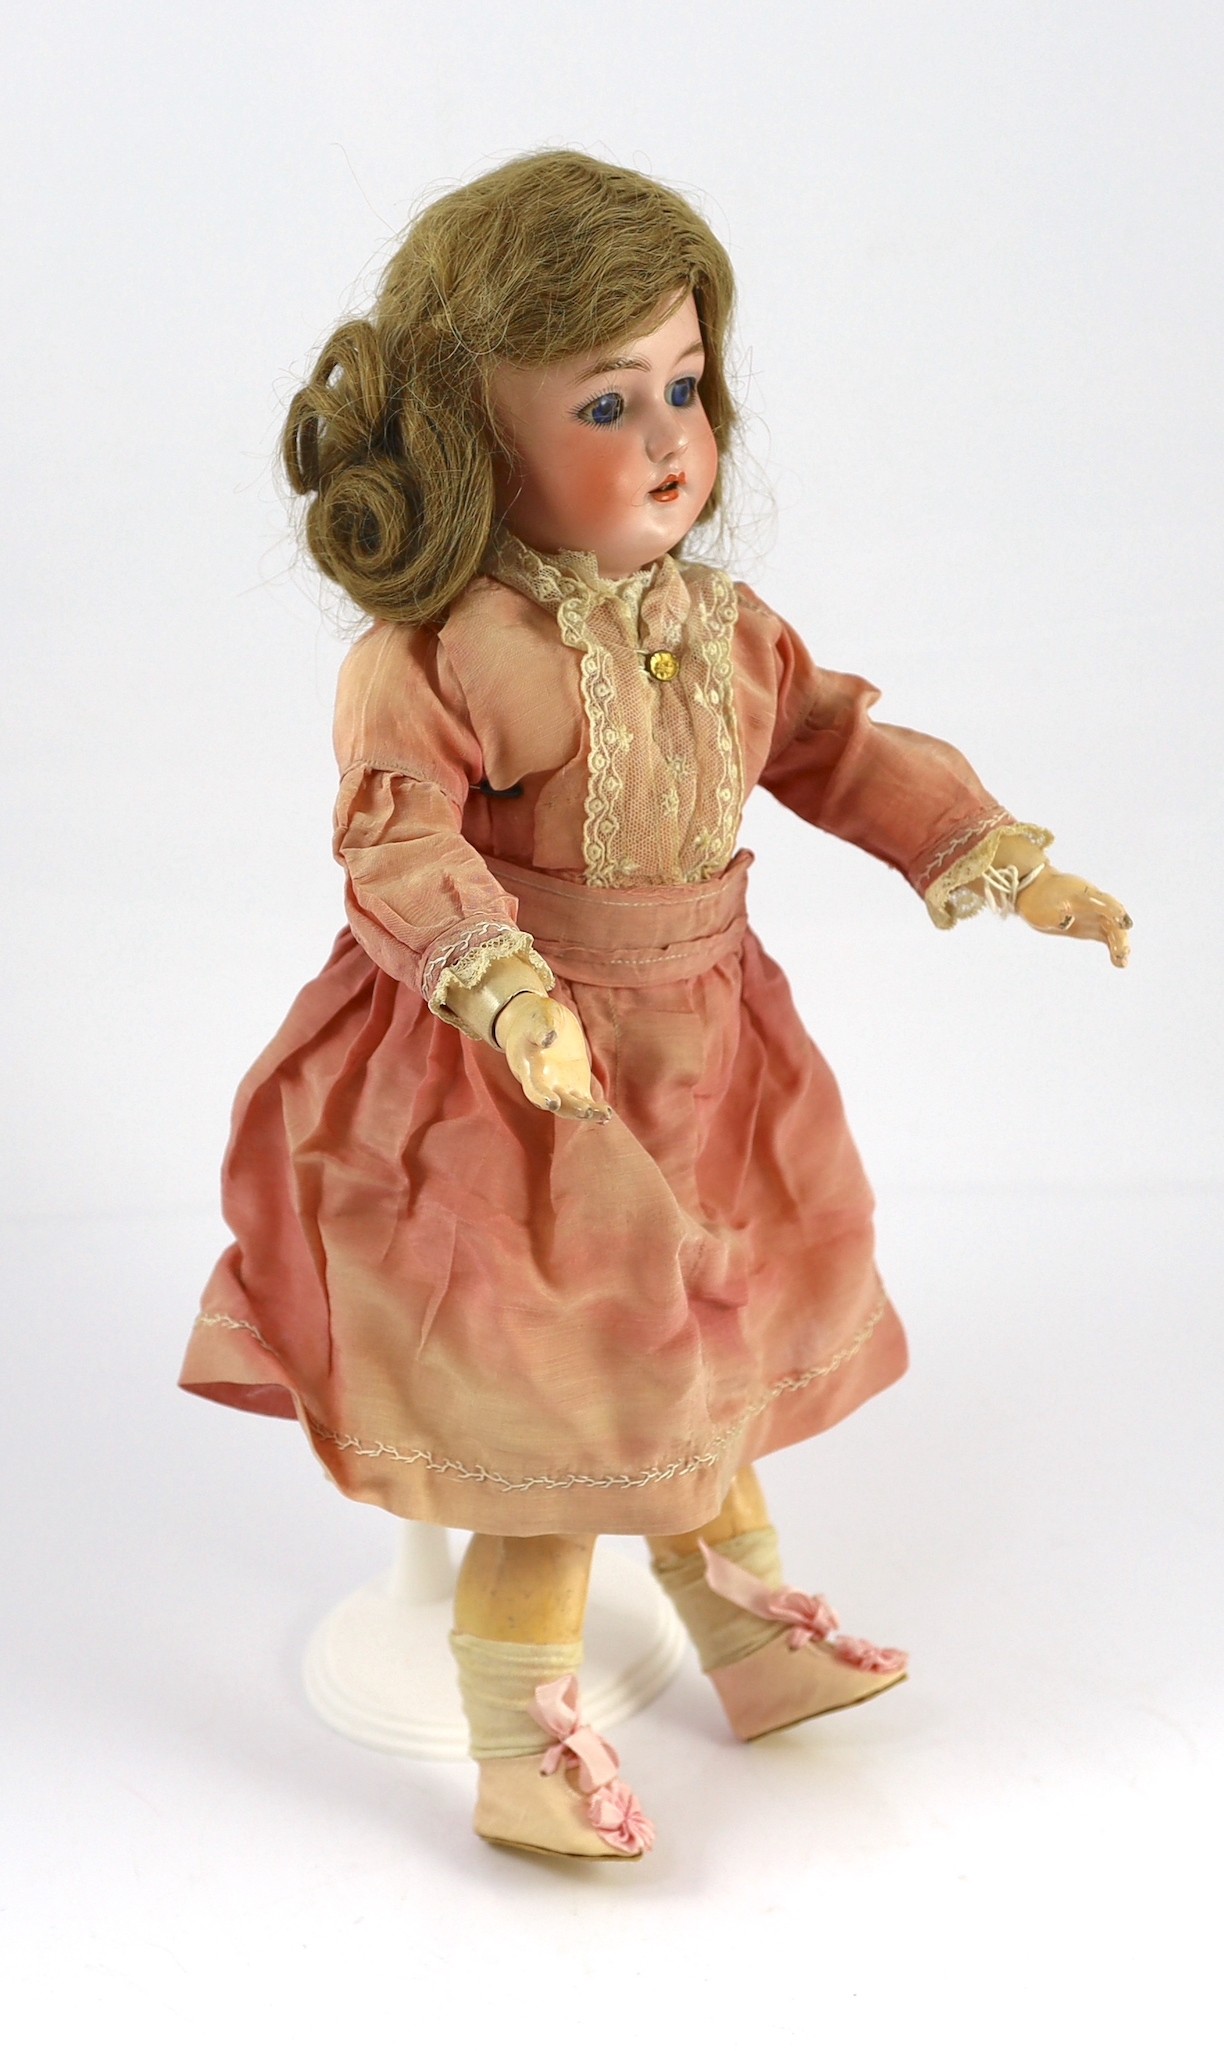 A Simon & Halbig S. & C. bisque doll, German, circa 1895, impressed 43, with open mouth and upper - Image 2 of 3